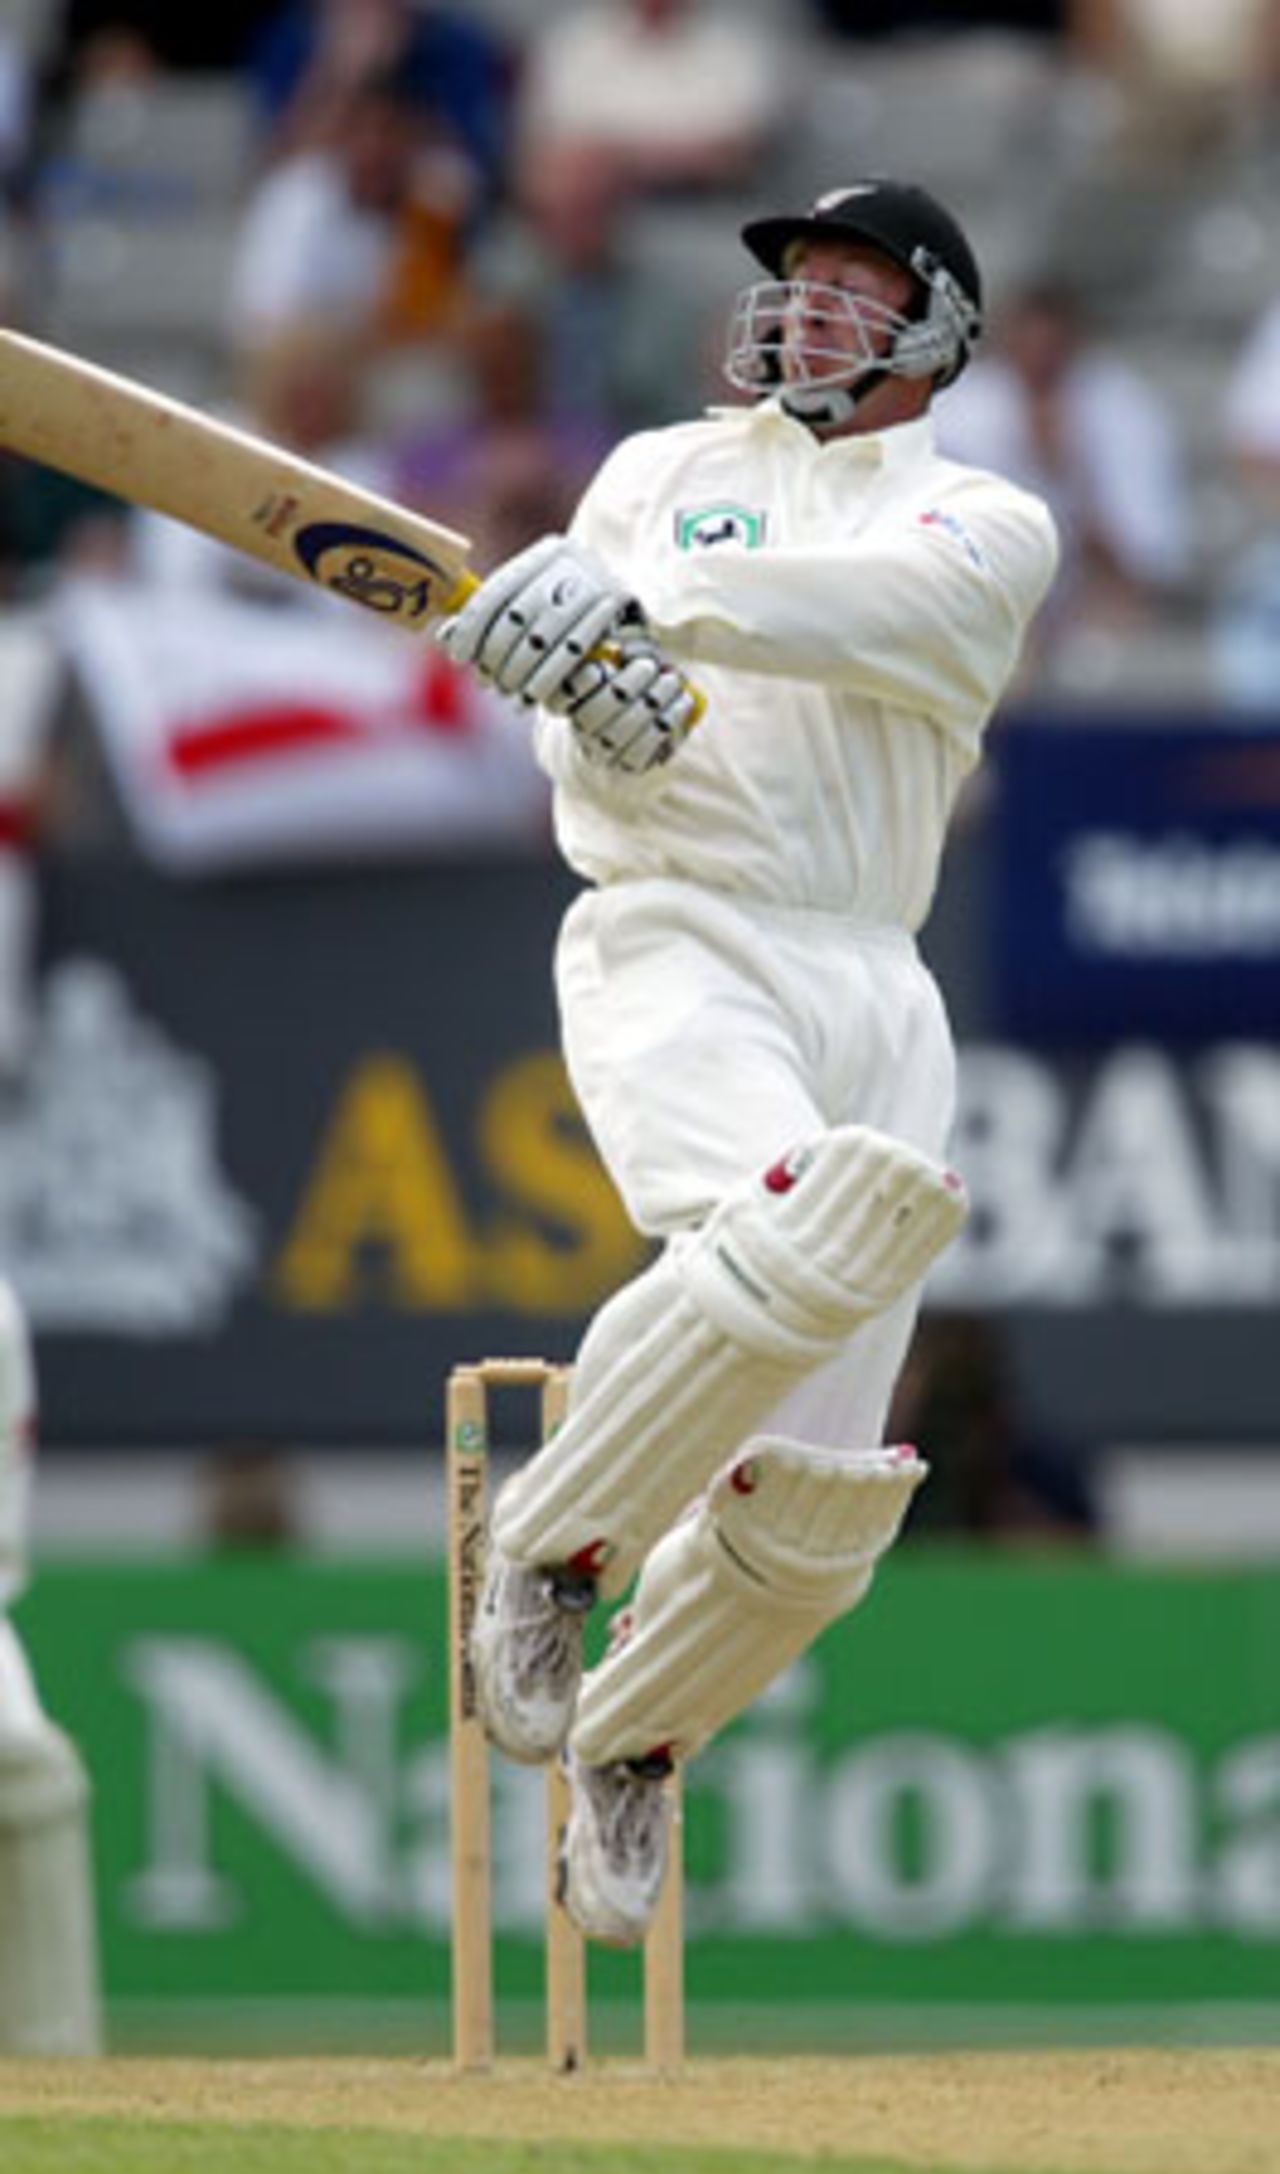 New Zealand batsman Chris Harris jumps to pull a short delivery. Harris ended the first day on 55 not out. 3rd Test: New Zealand v England at Eden Park, Auckland, 30 March-3 April 2002 (30 March 2002).